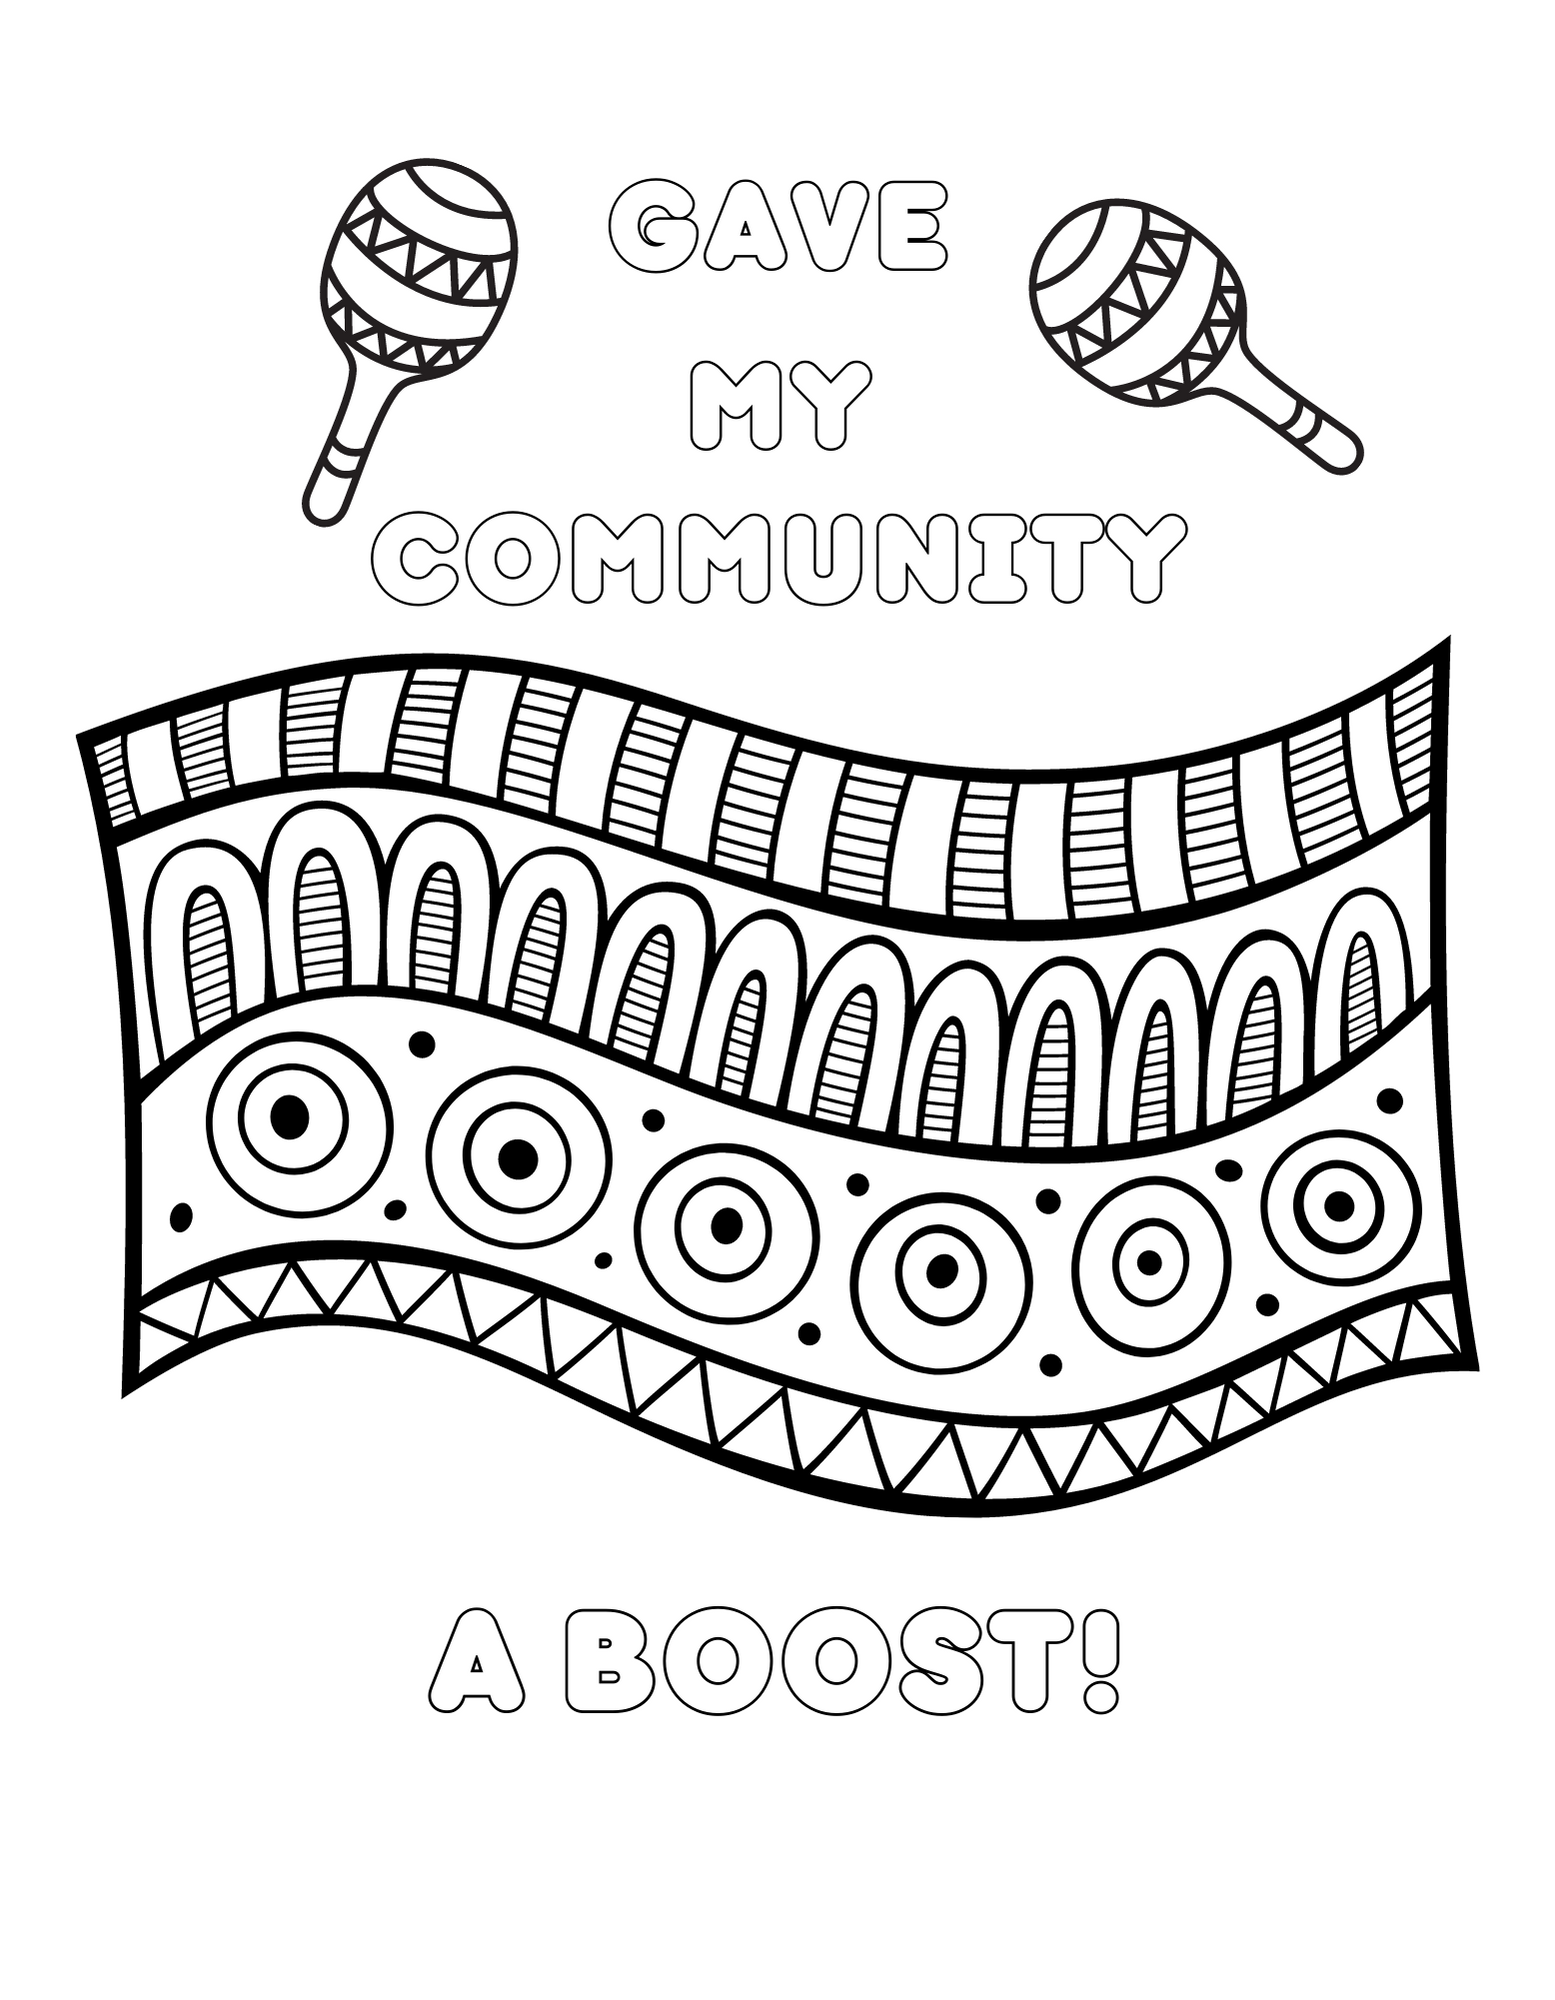 Latina Pattern, Gave my Community a Boost Coloring Sheet